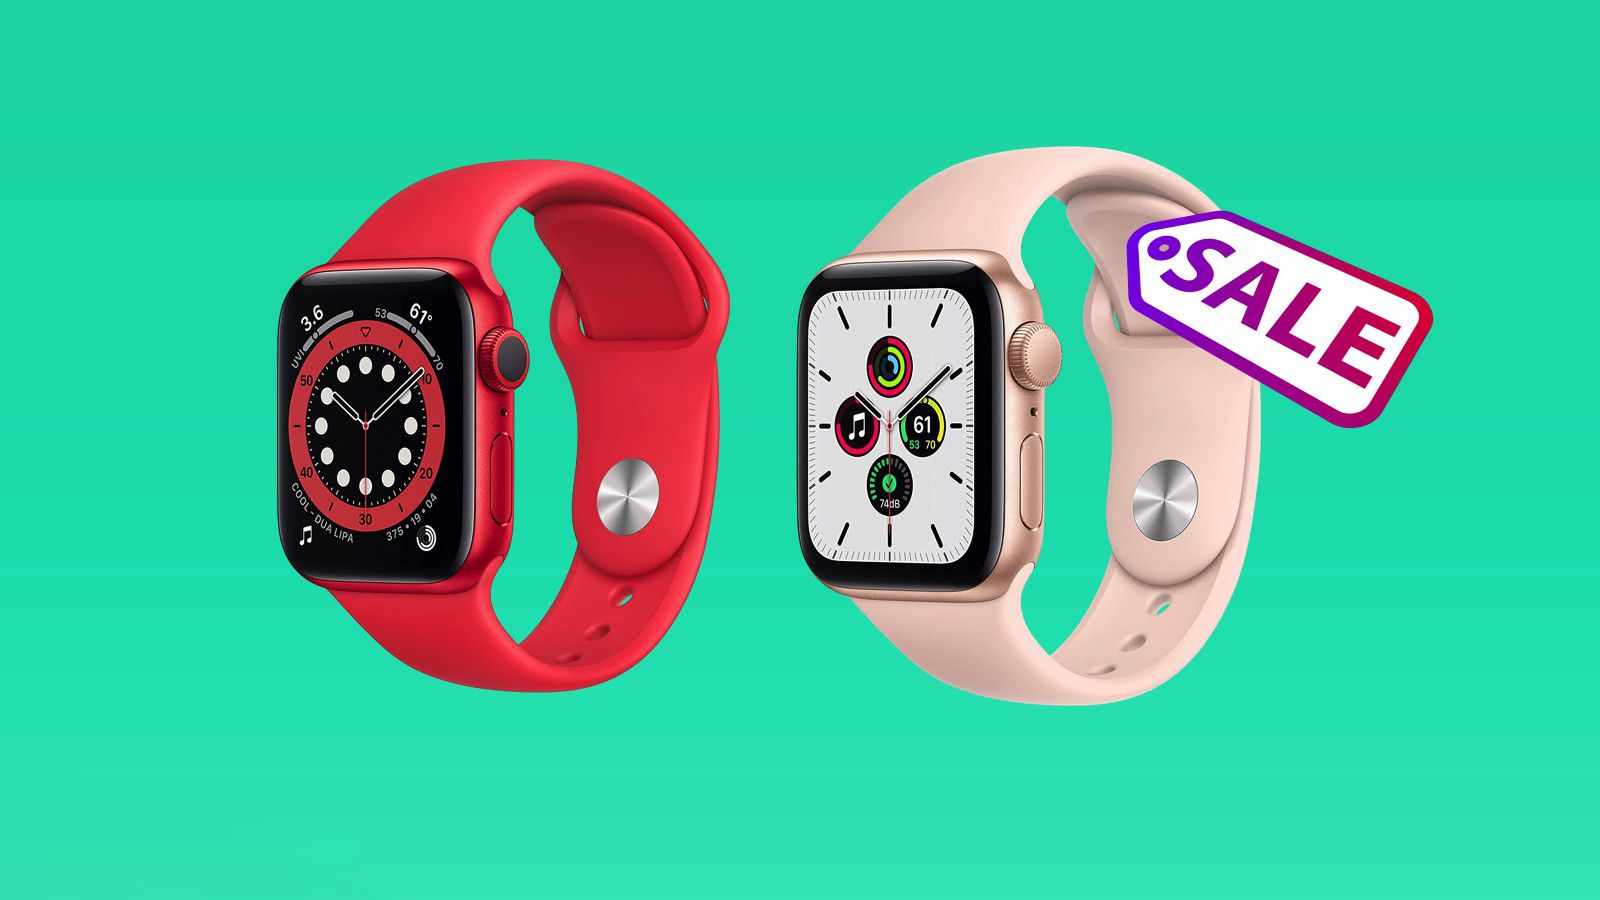 Deals Save Up to 50 on Apple Watch Series 6 and SE Models MacRumors